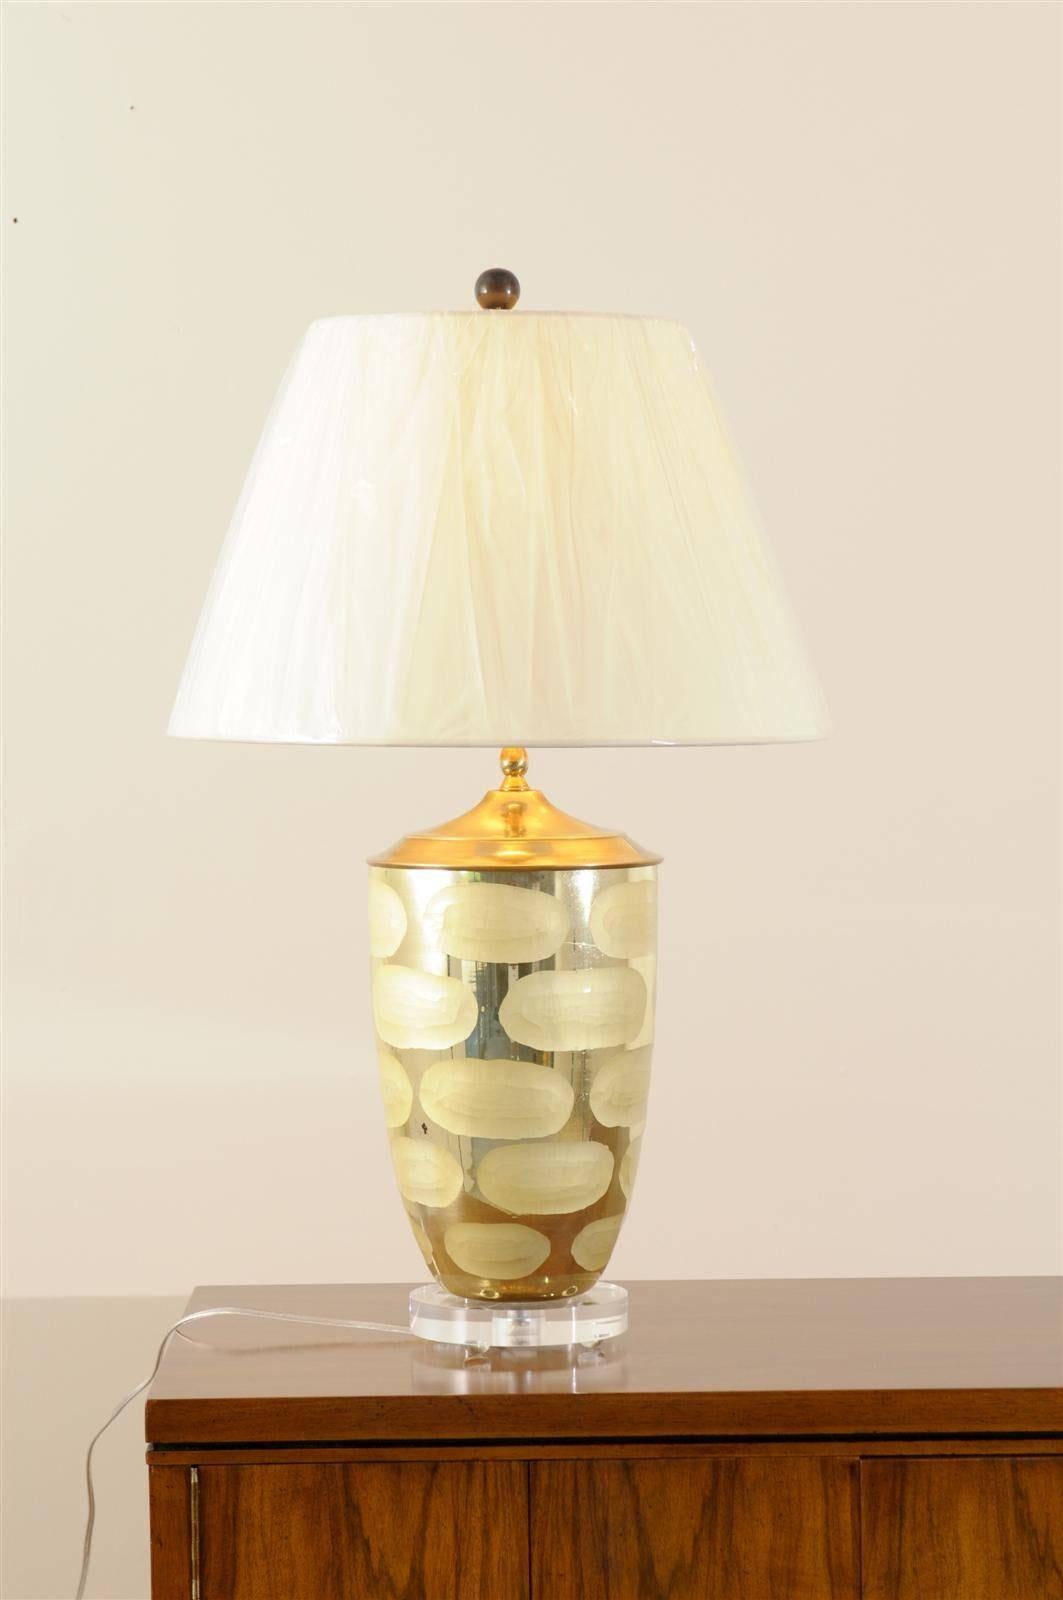 A fabulous pair of vintage Mercury glass lamps.  Highly functional pieces, as they display both silver and gold tones.  Exceptional Jewelry !  Excellent Restored Condition.  The lamps have been rewired using clear cord, new 3-way sockets and new